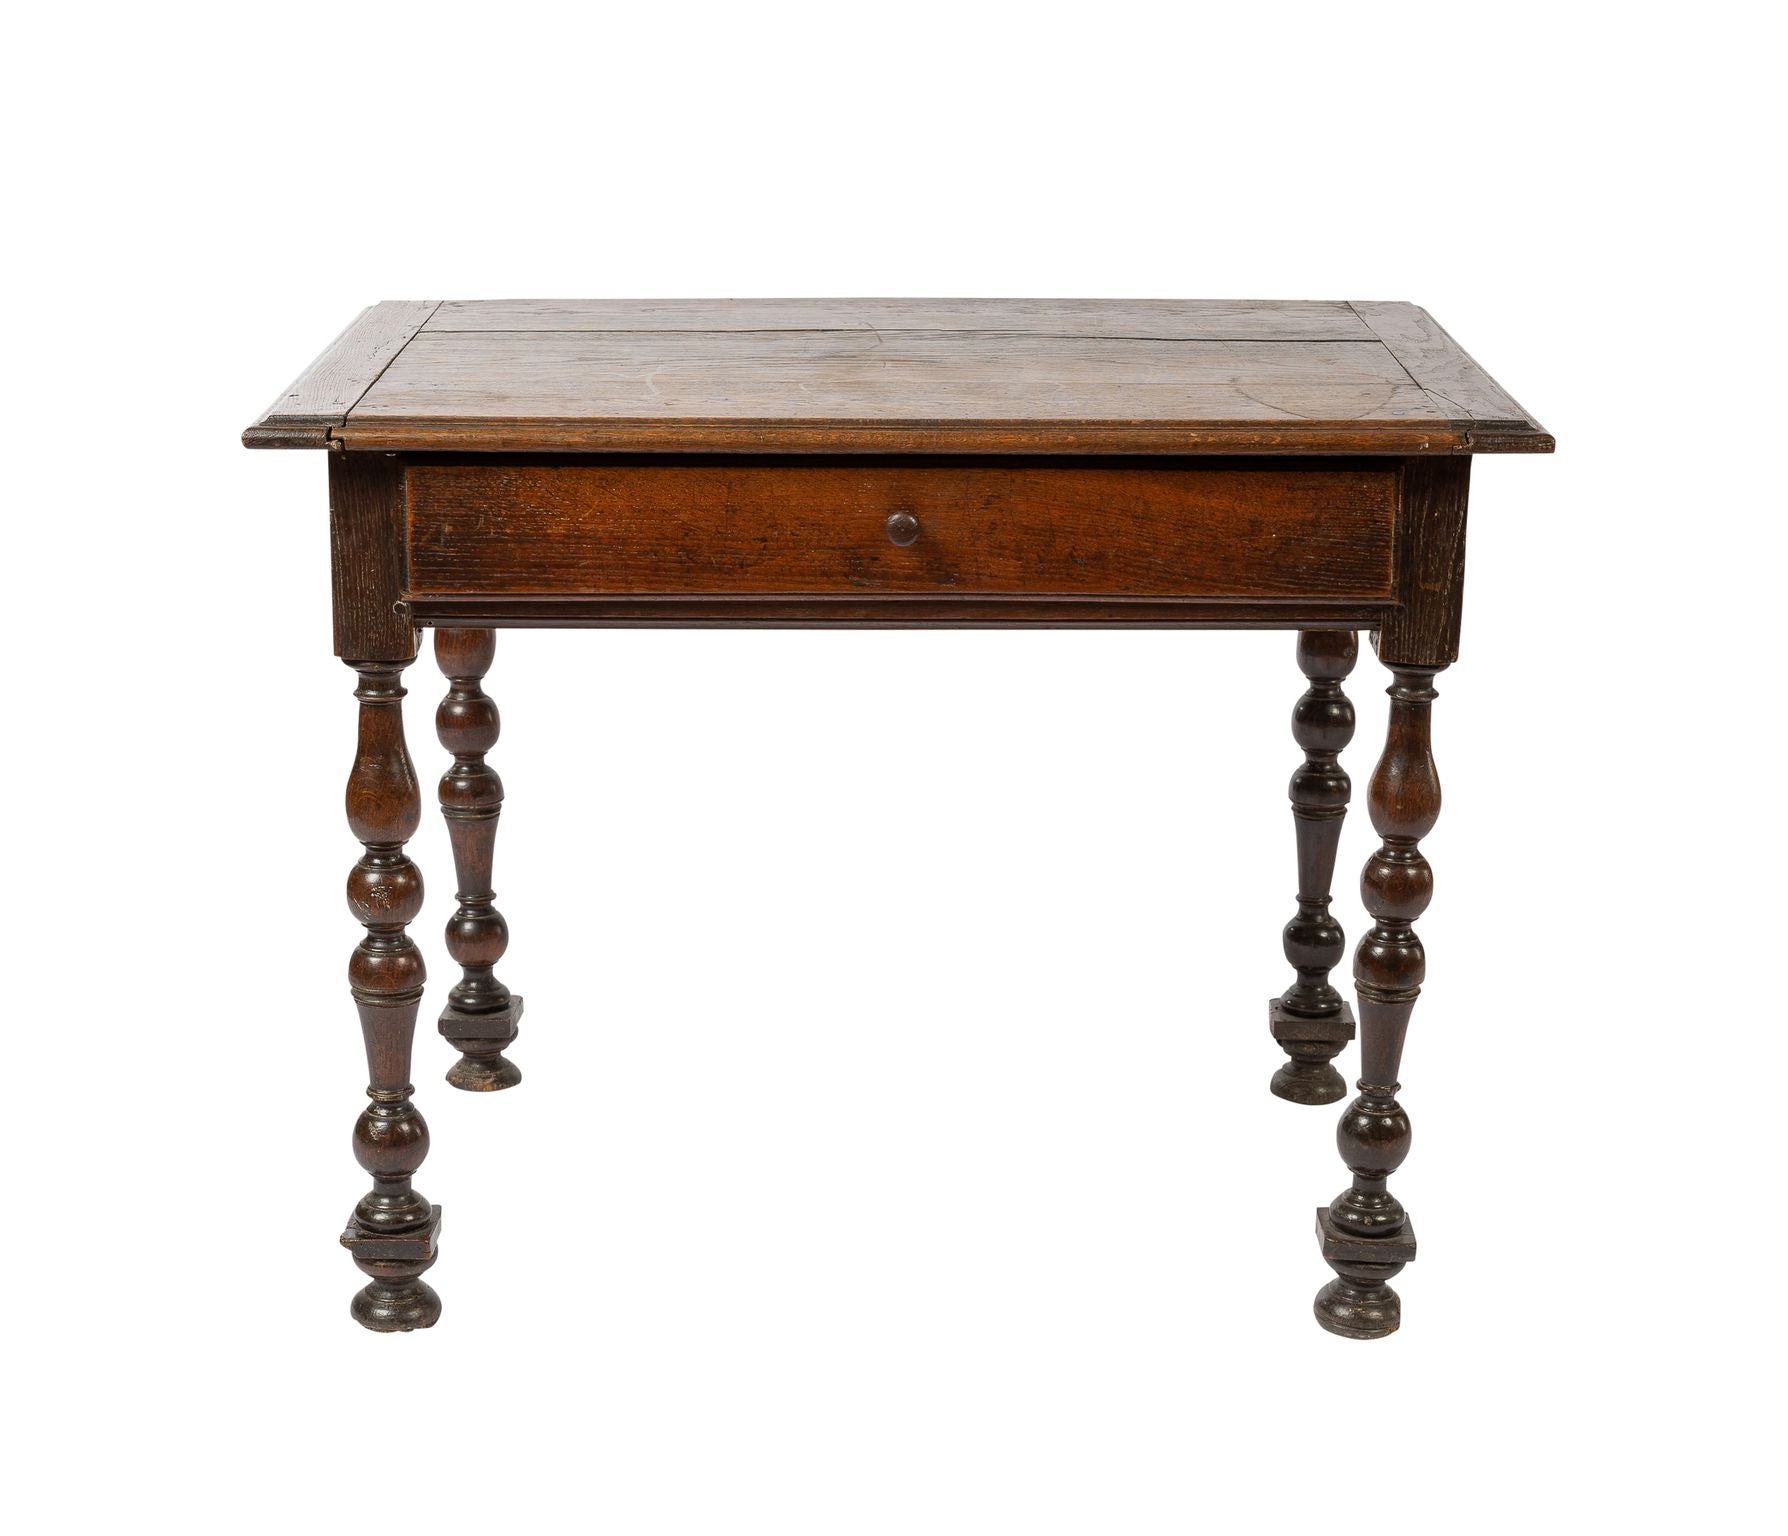 19th century antique French oak rustic side table/desk from the French Alps